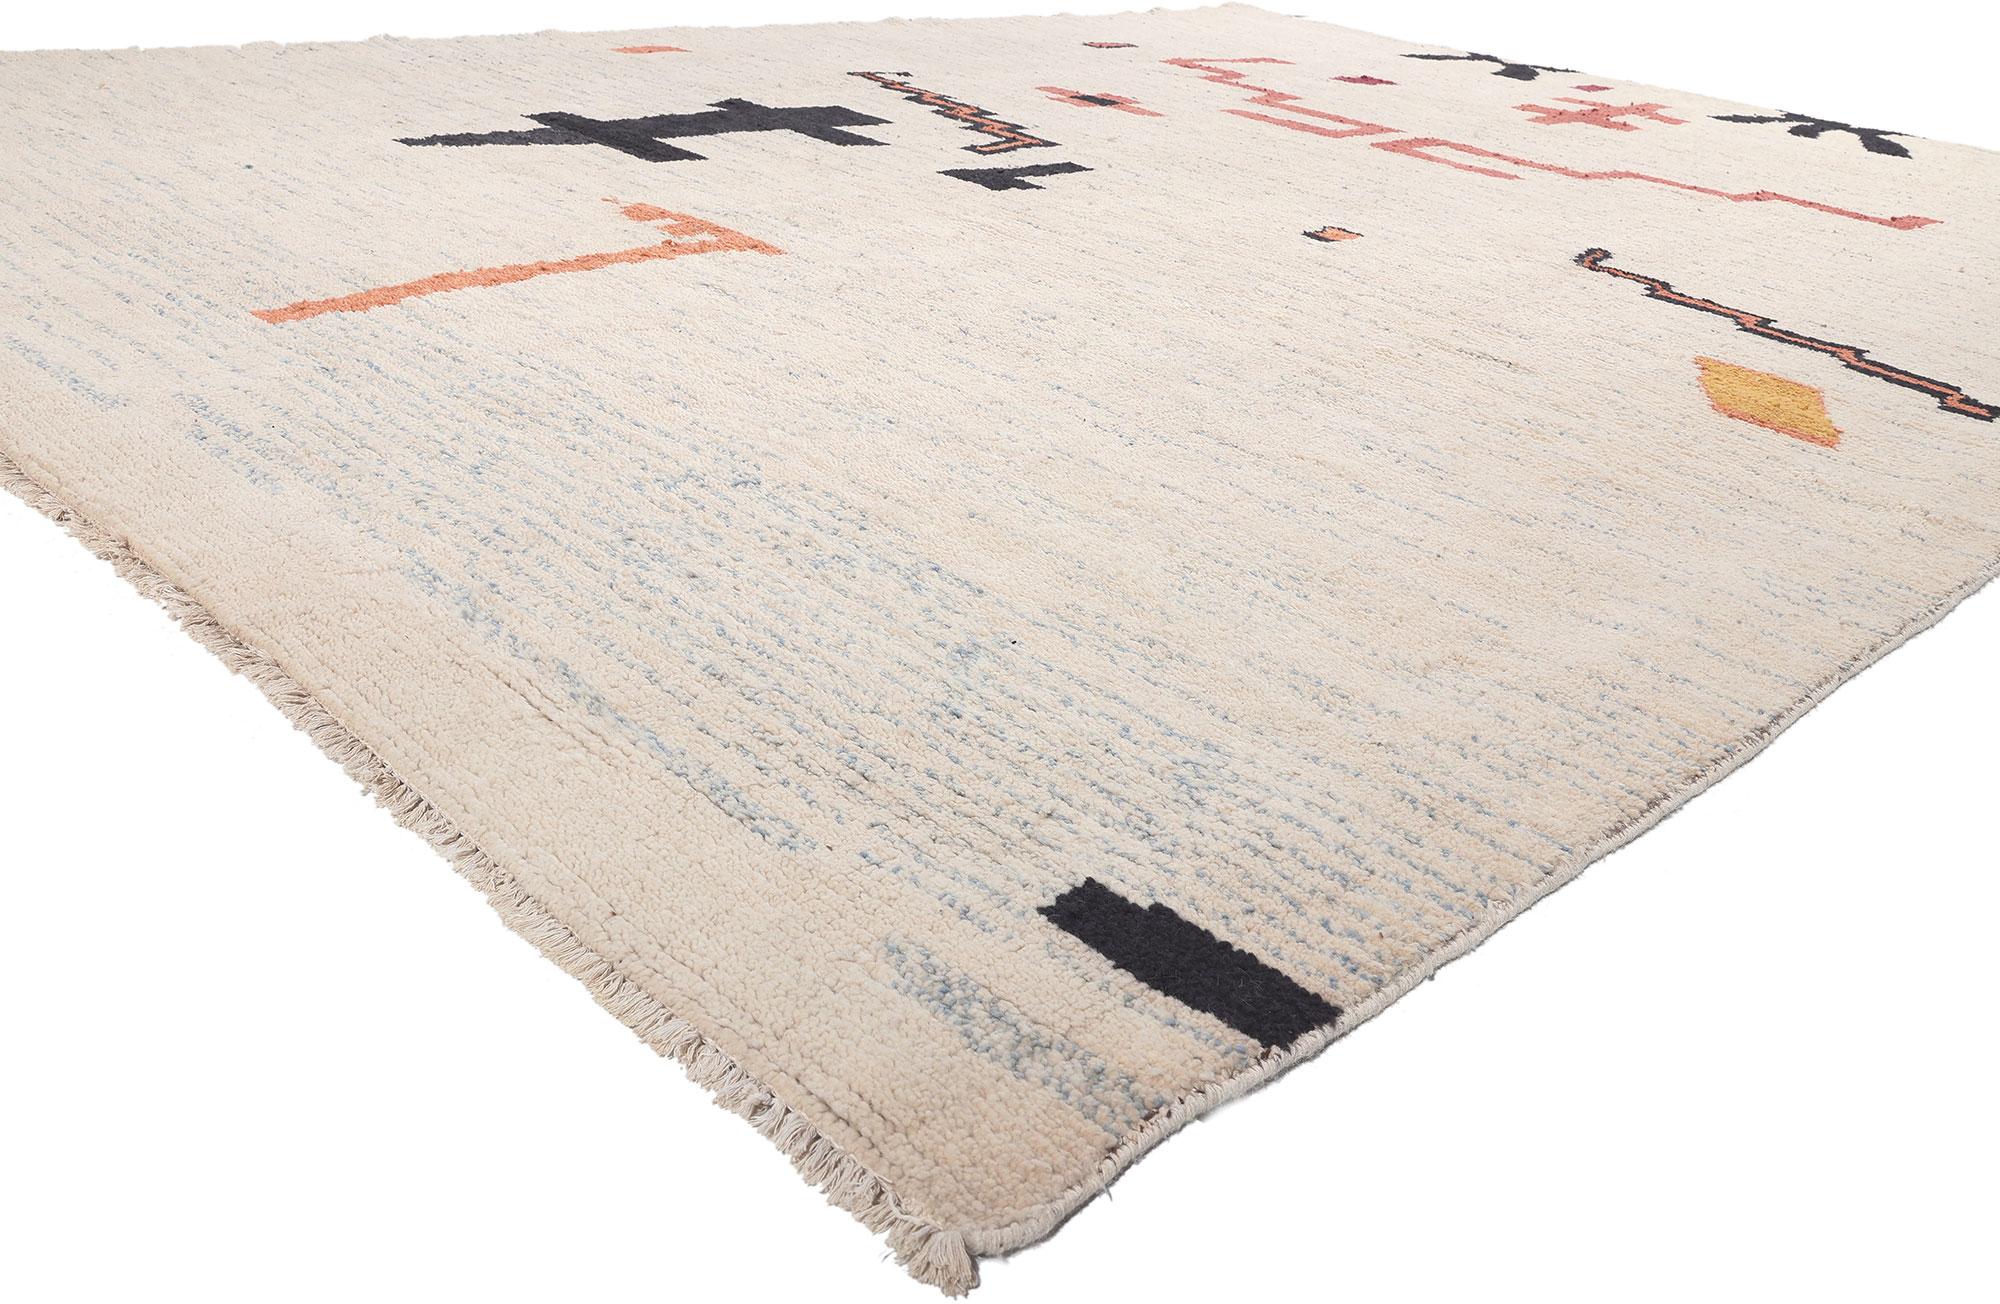 81012 Modern Moroccan Rug, 10'04 x 13'11. Emanating nomadic charm with incredible detail and texture, this modern Moroccan area rug will take on a curated lived-in look that feels timeless while imparting a sense of warmth and welcomed informality.